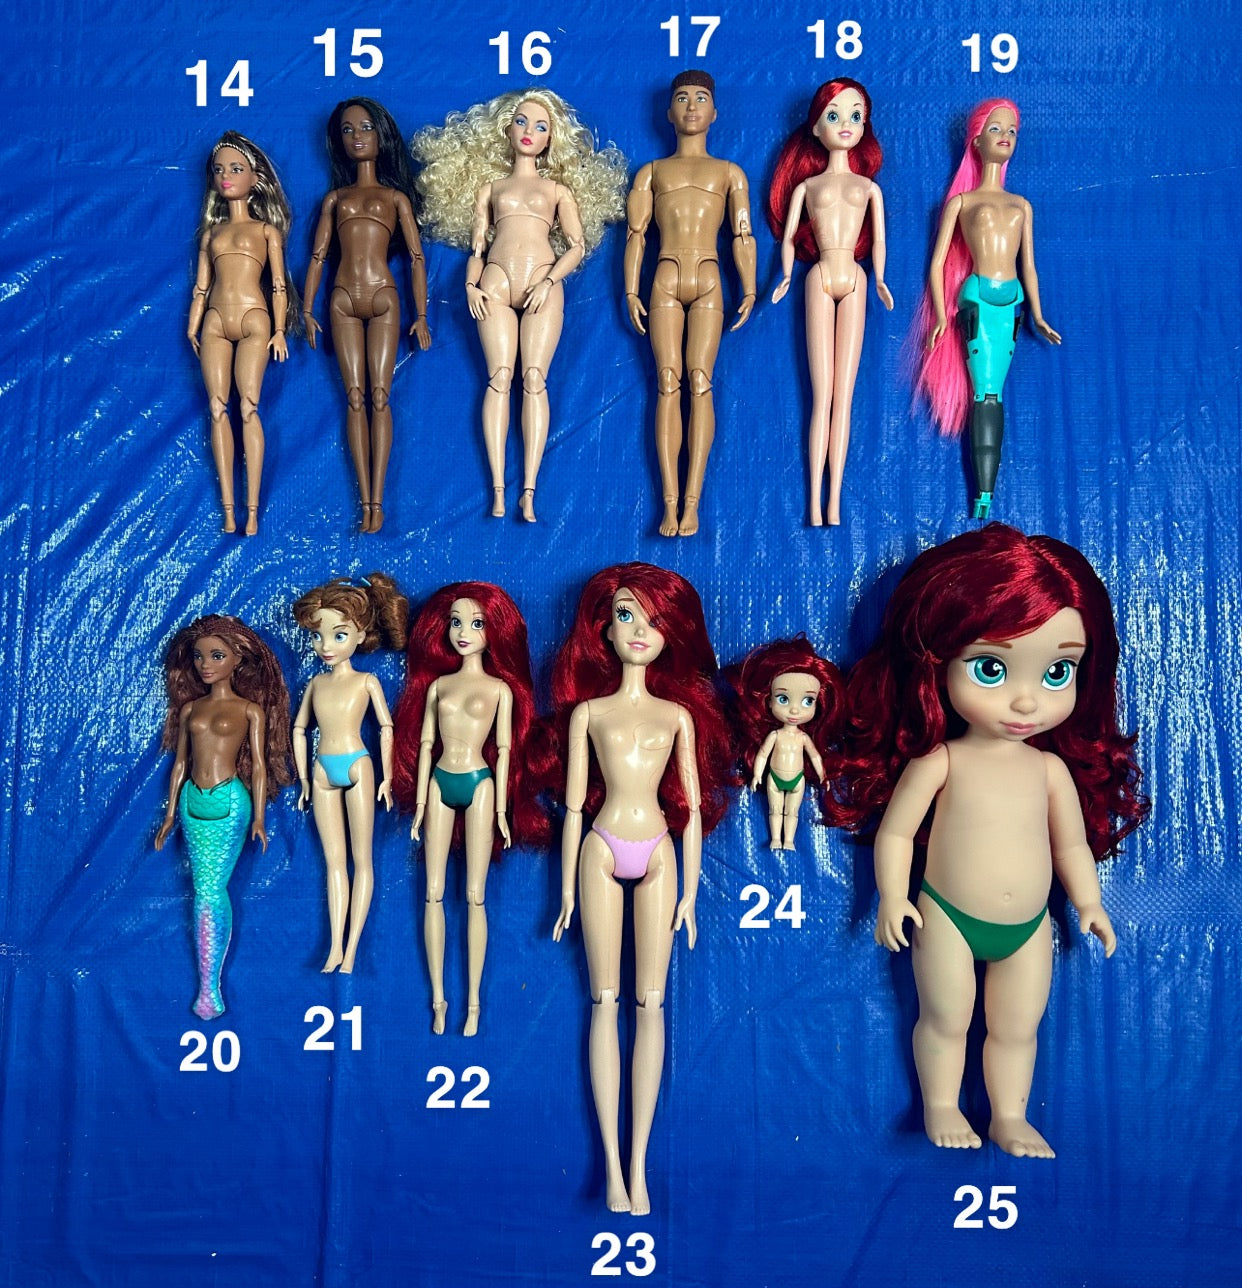 H2O silicone mermaid tail and bra for doll (doll not included)